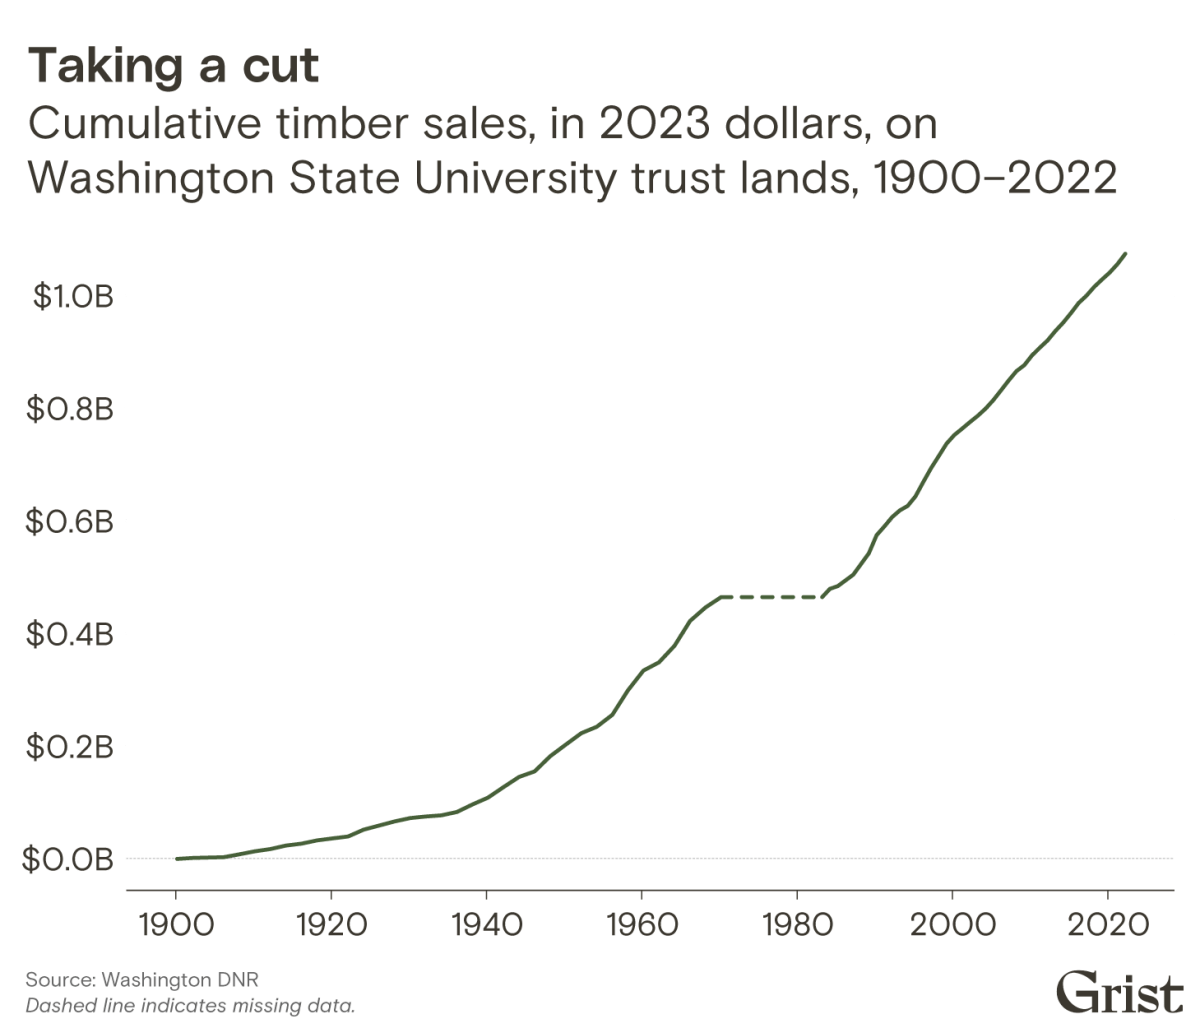 A line chart showing cumulative timber sales on Washington State University trust lands from 1984 to 2021.